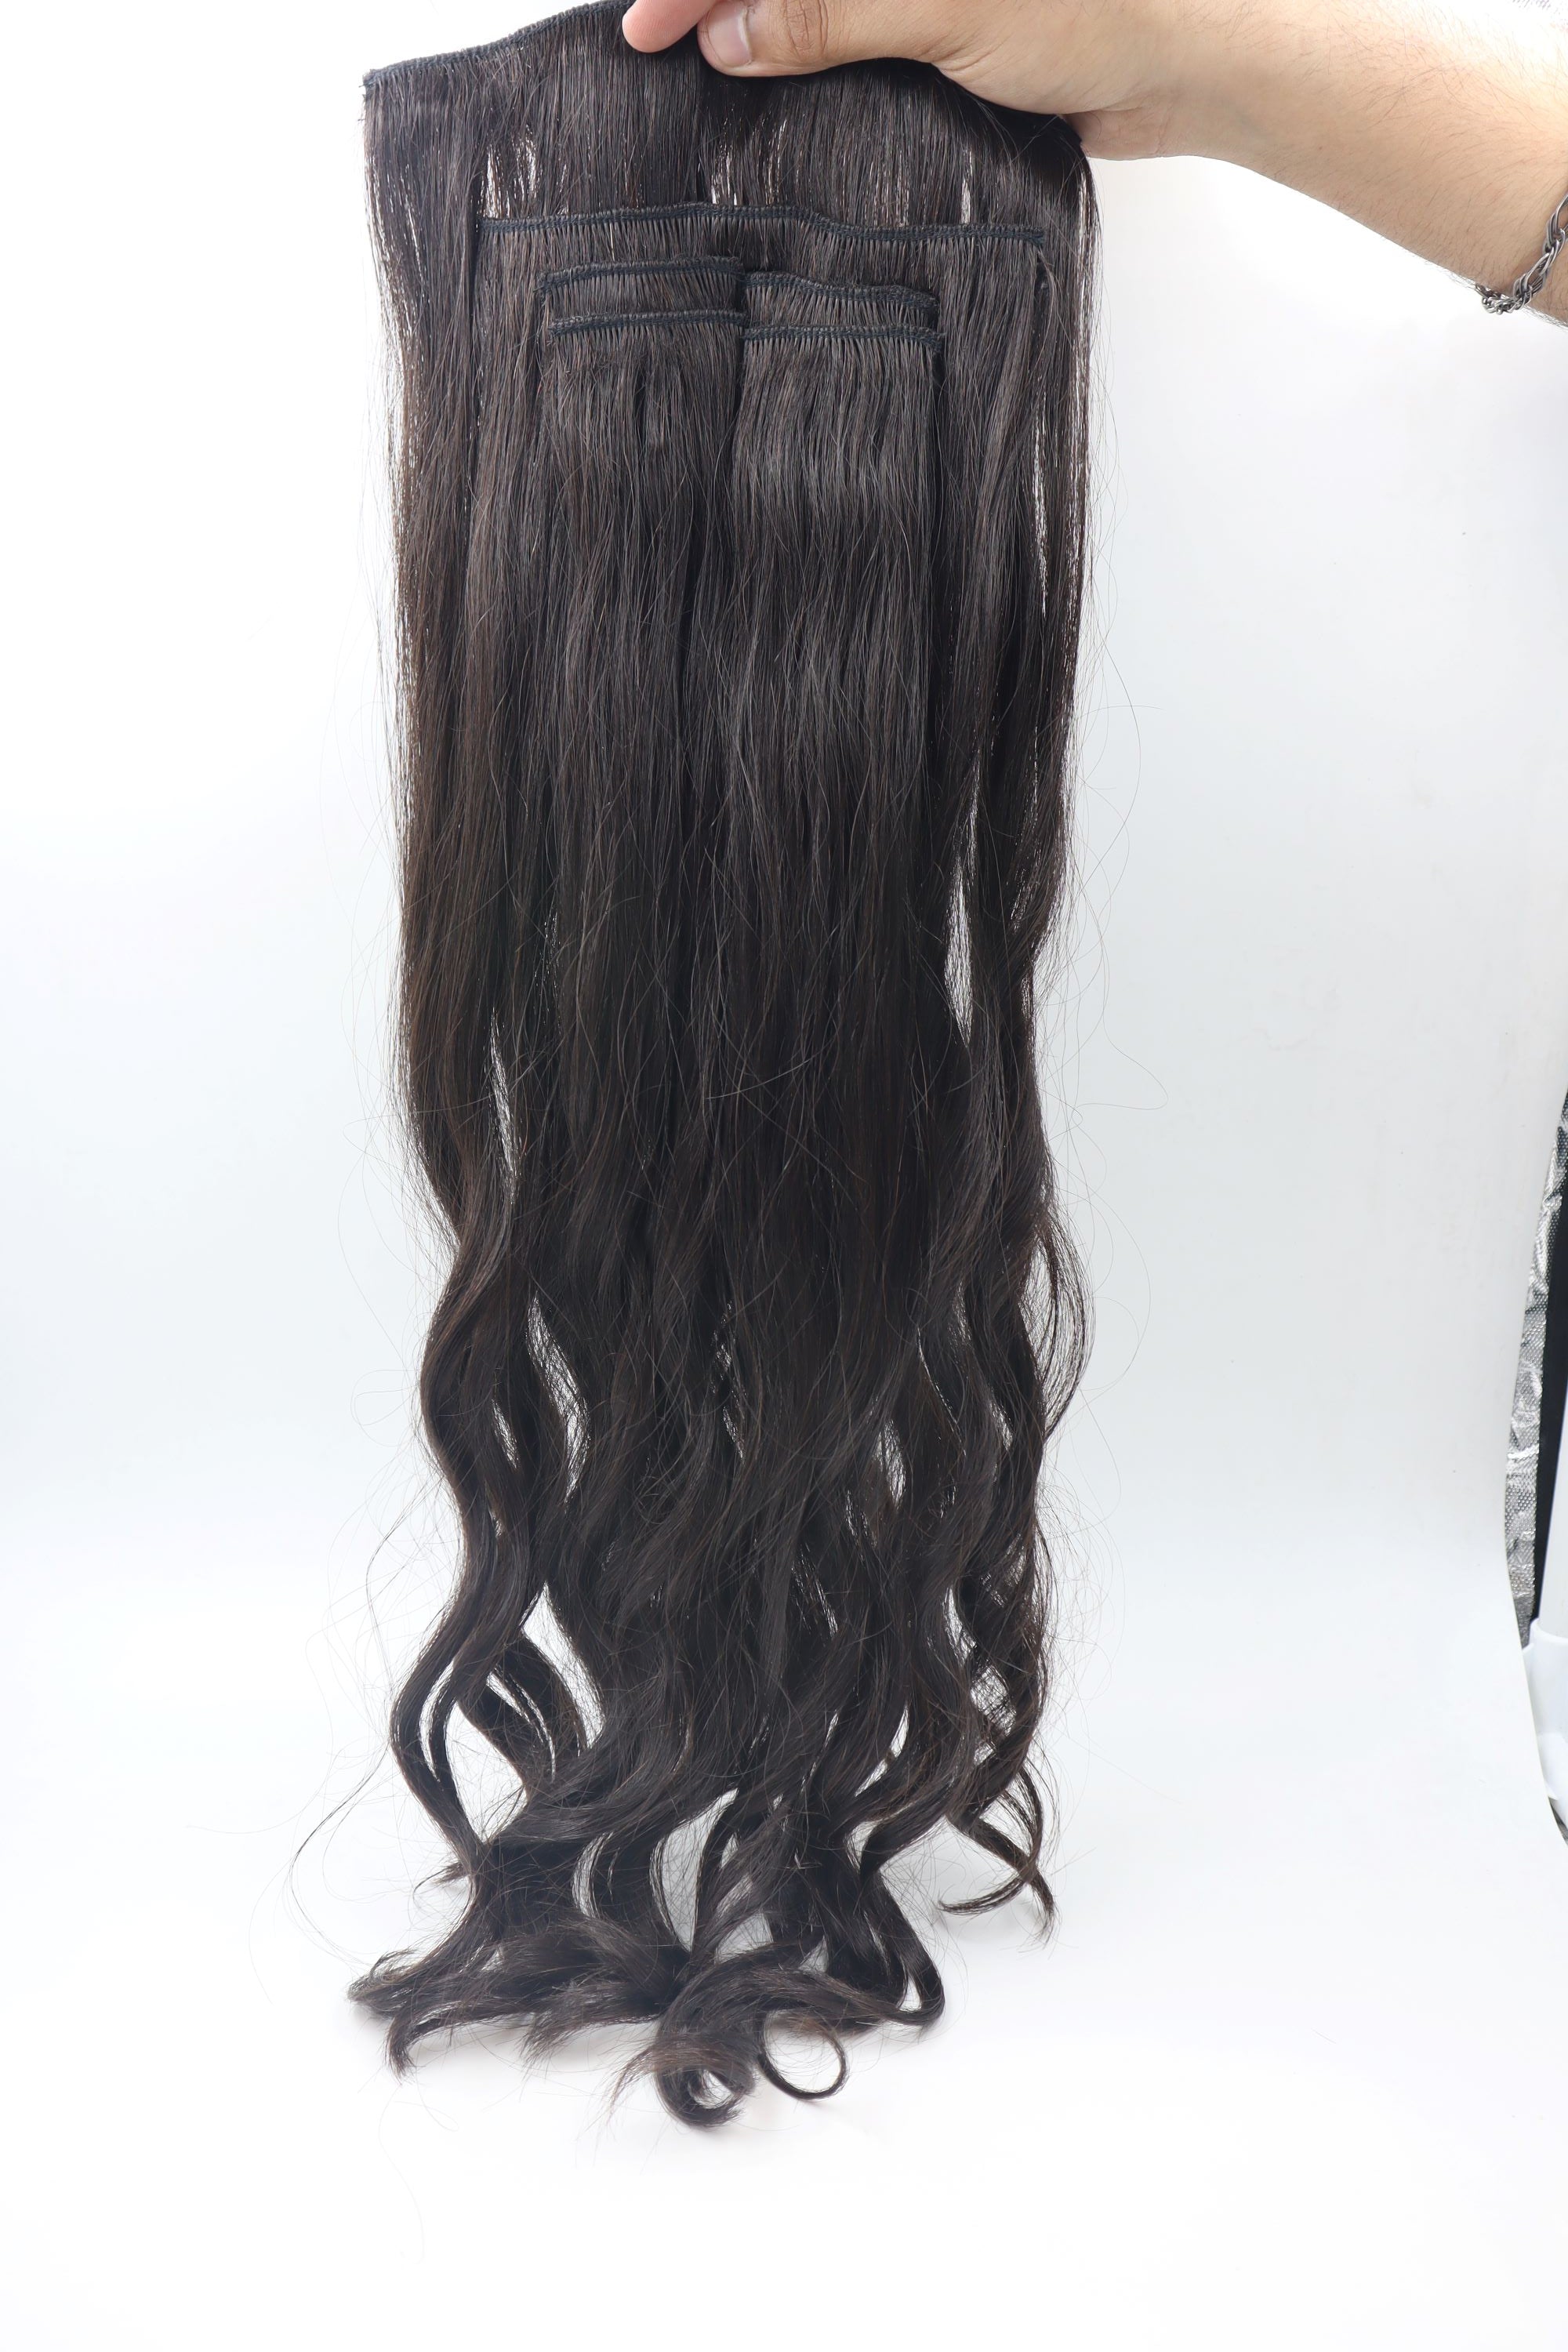 Clip-In set of 6 extensions